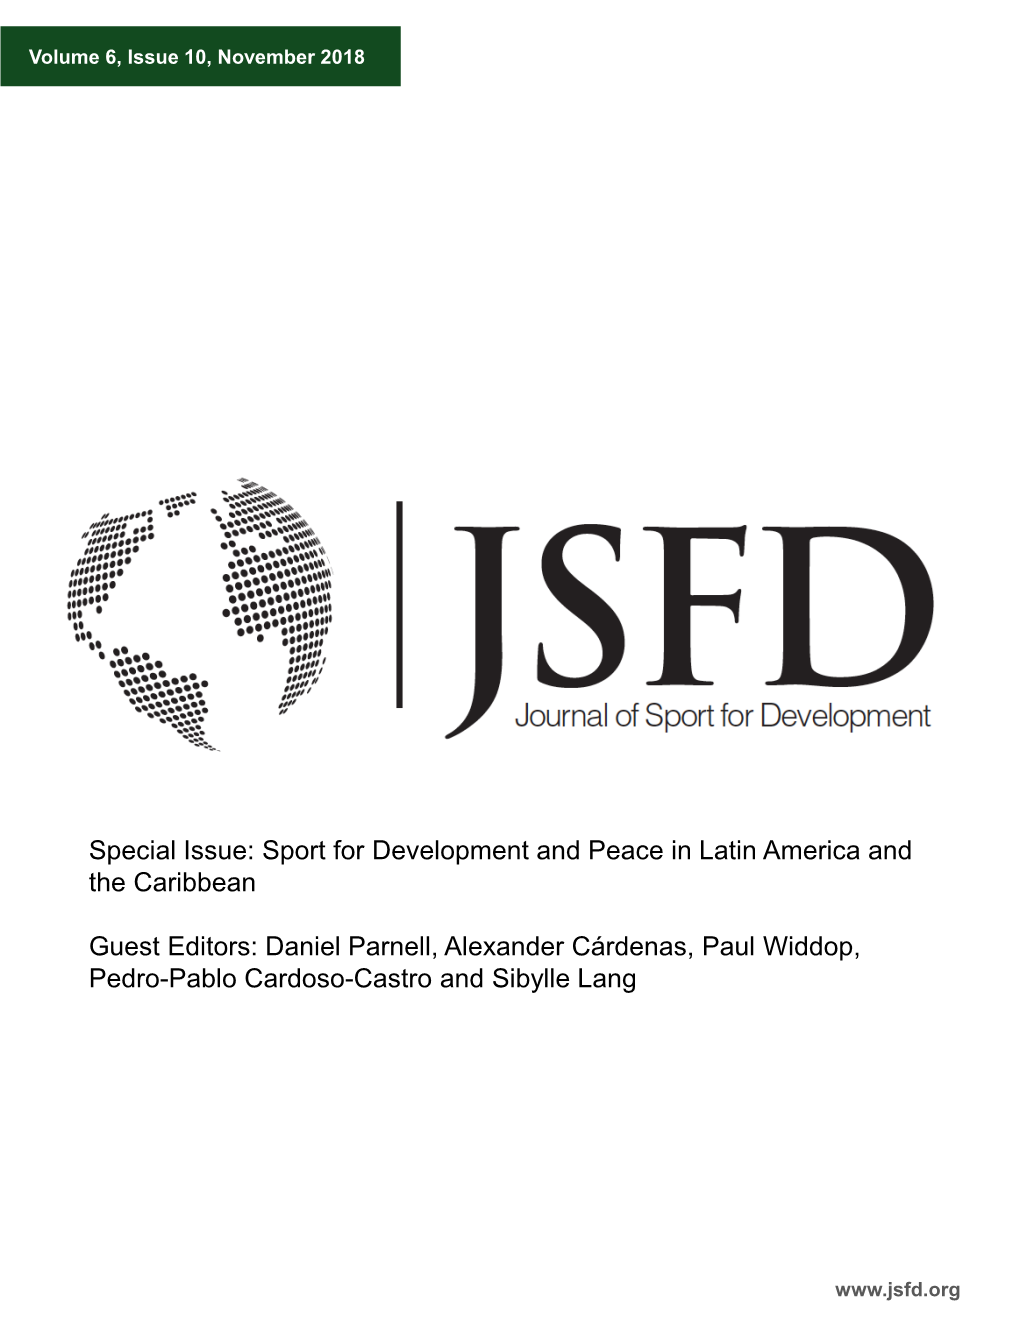 Special Issue: Sport for Development and Peace in Latin America and the Caribbean